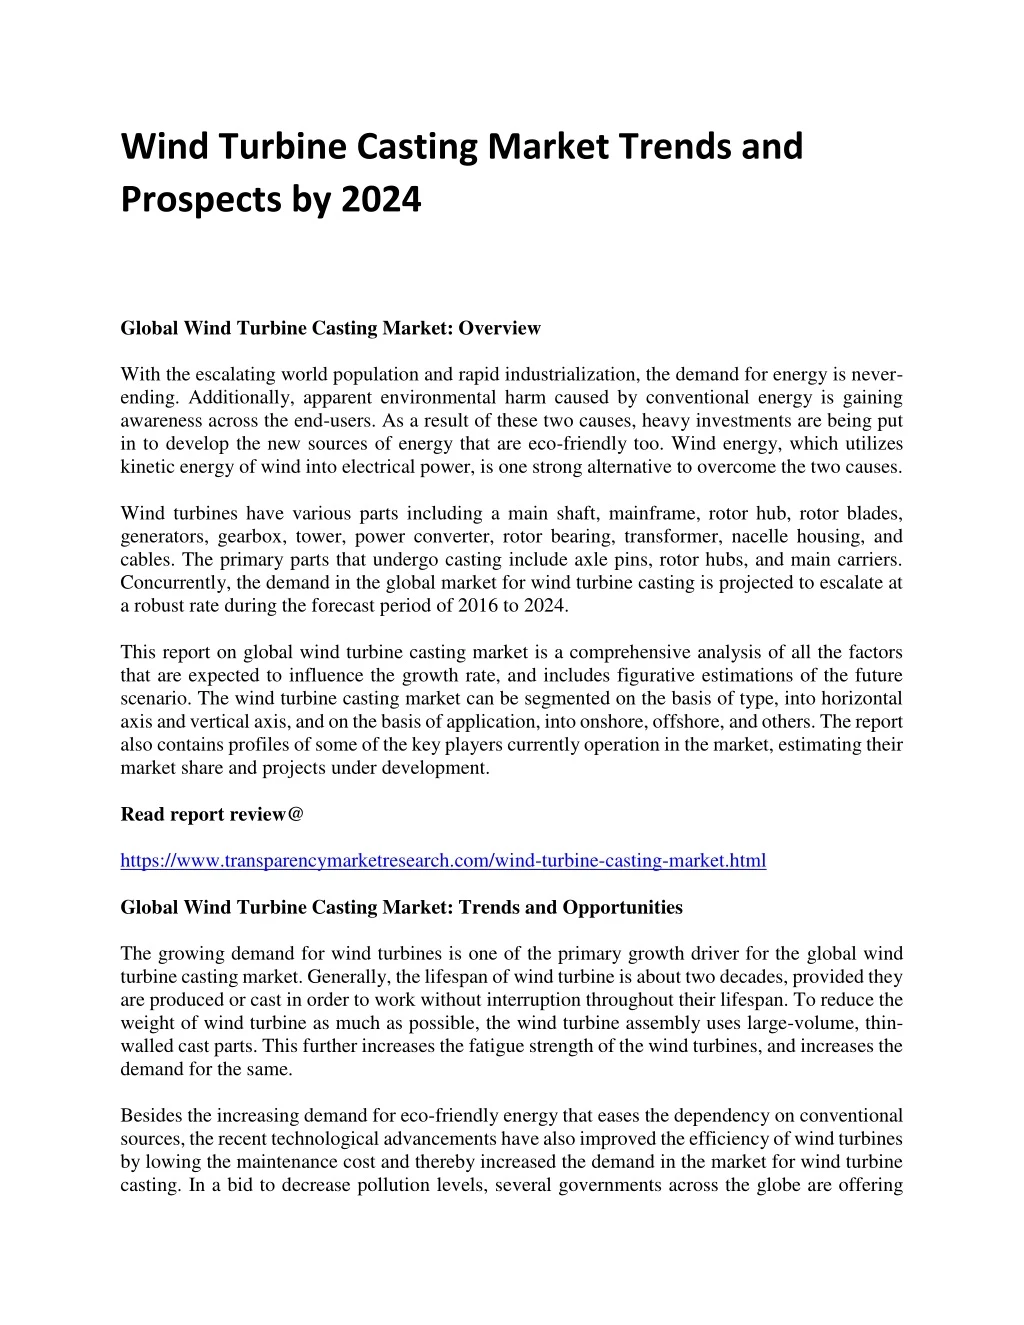 wind turbine casting market trends and prospects